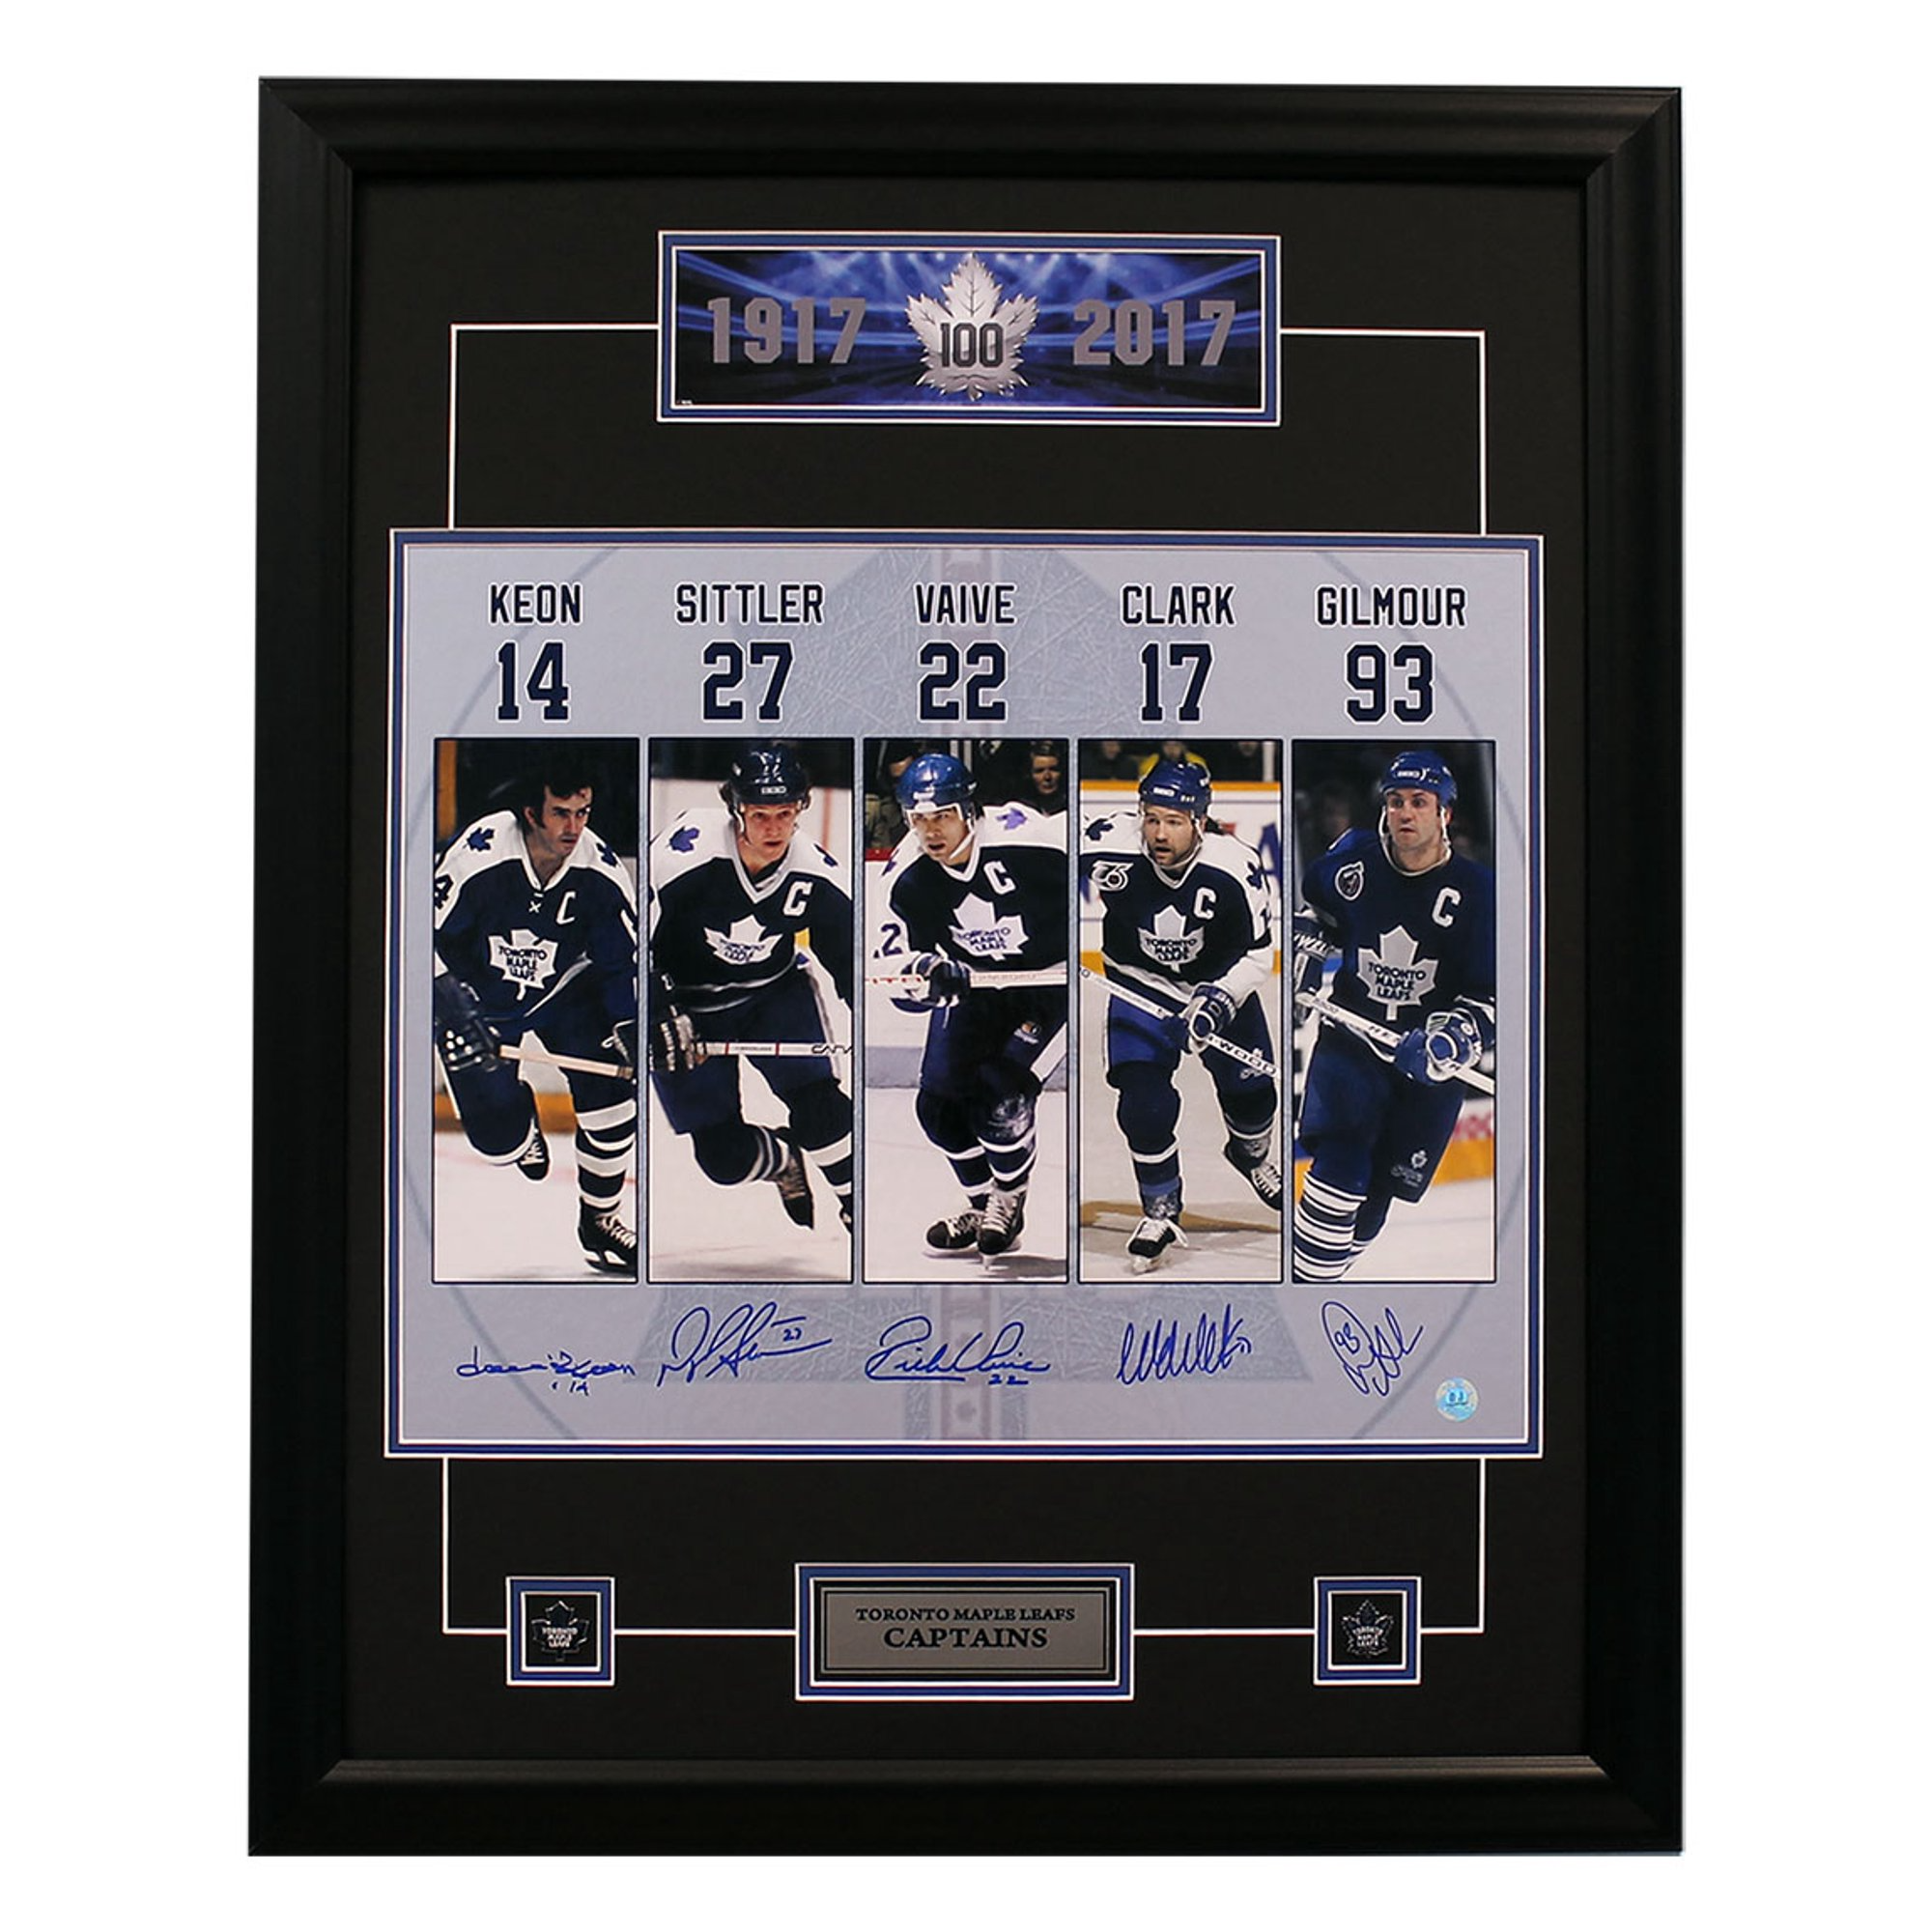 Keon-Sittler-Vaive-Clark-Gilmour Signed 26x32 Toronto Maple Leafs Captains Frame